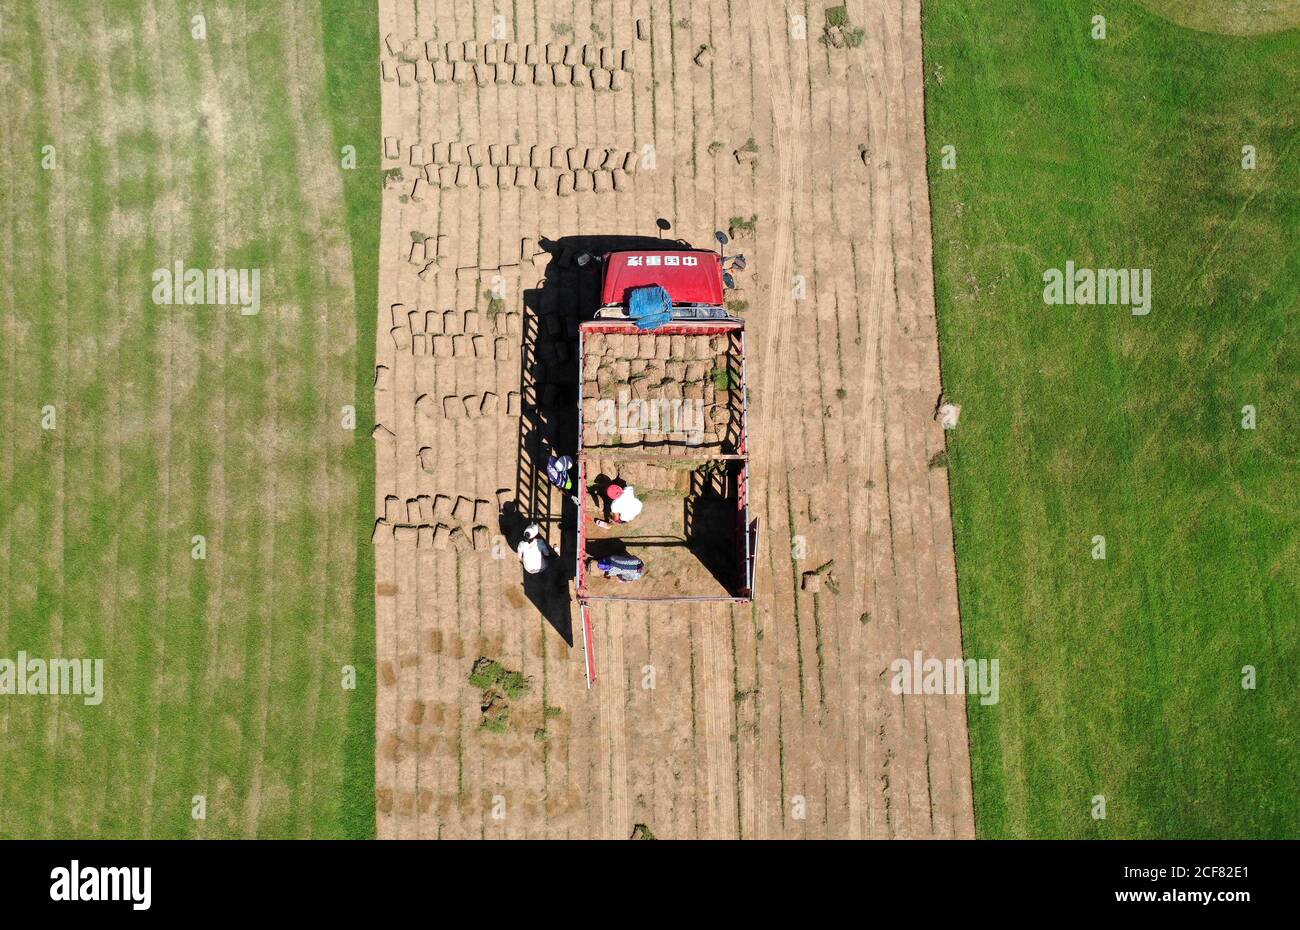 Zhengzhou. 3rd Sep, 2020. Aerial photo taken on Sept. 3, 2020 shows villagers uploading turfs in Zhangzhuang Village of Lankao County, central China's Henan Province. Zhangzhuang Village has actively developed the cultivation of Lankao honeydew melons, edible fungi, peaches, turf, etc. to promote employment through industry. Credit: Feng Dapeng/Xinhua/Alamy Live News Stock Photo